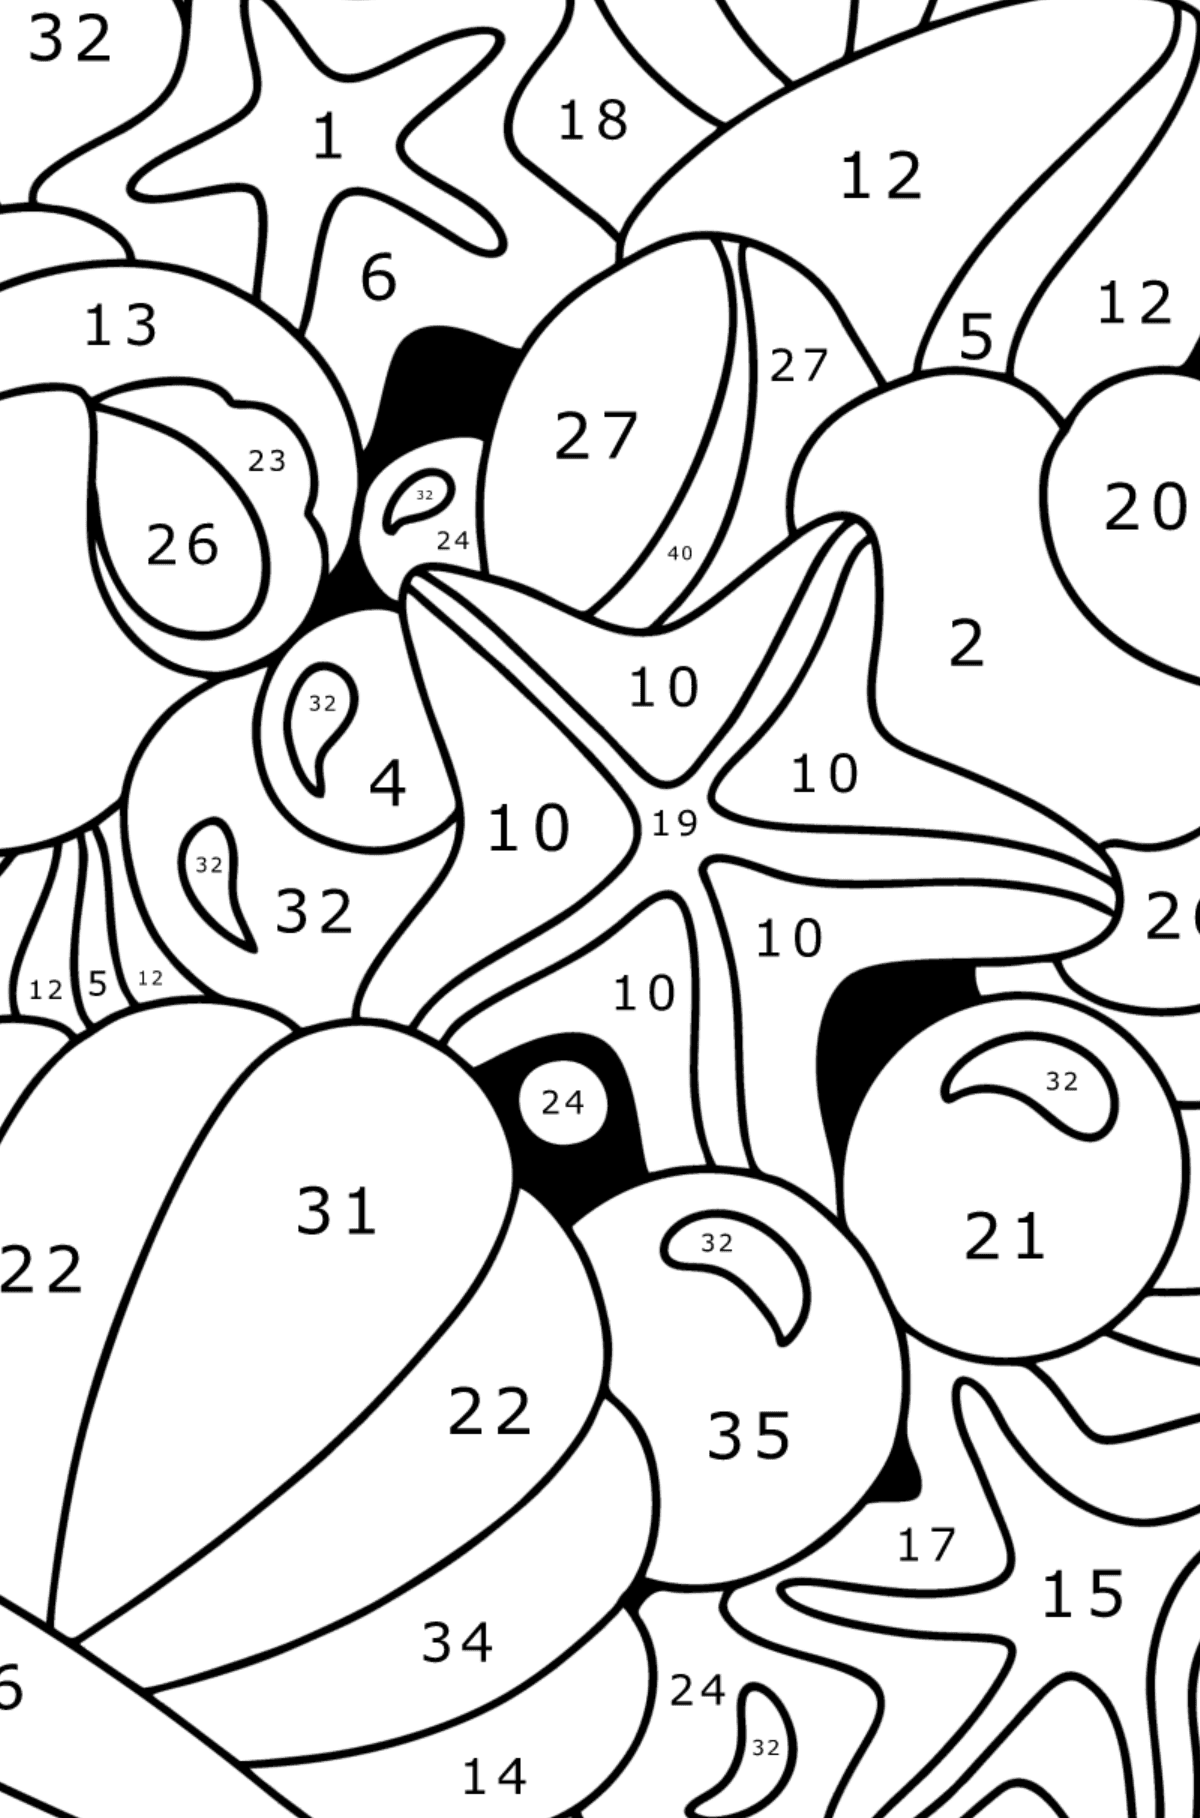 Doodle coloring page for Kids - Shells - Coloring by Numbers for Kids